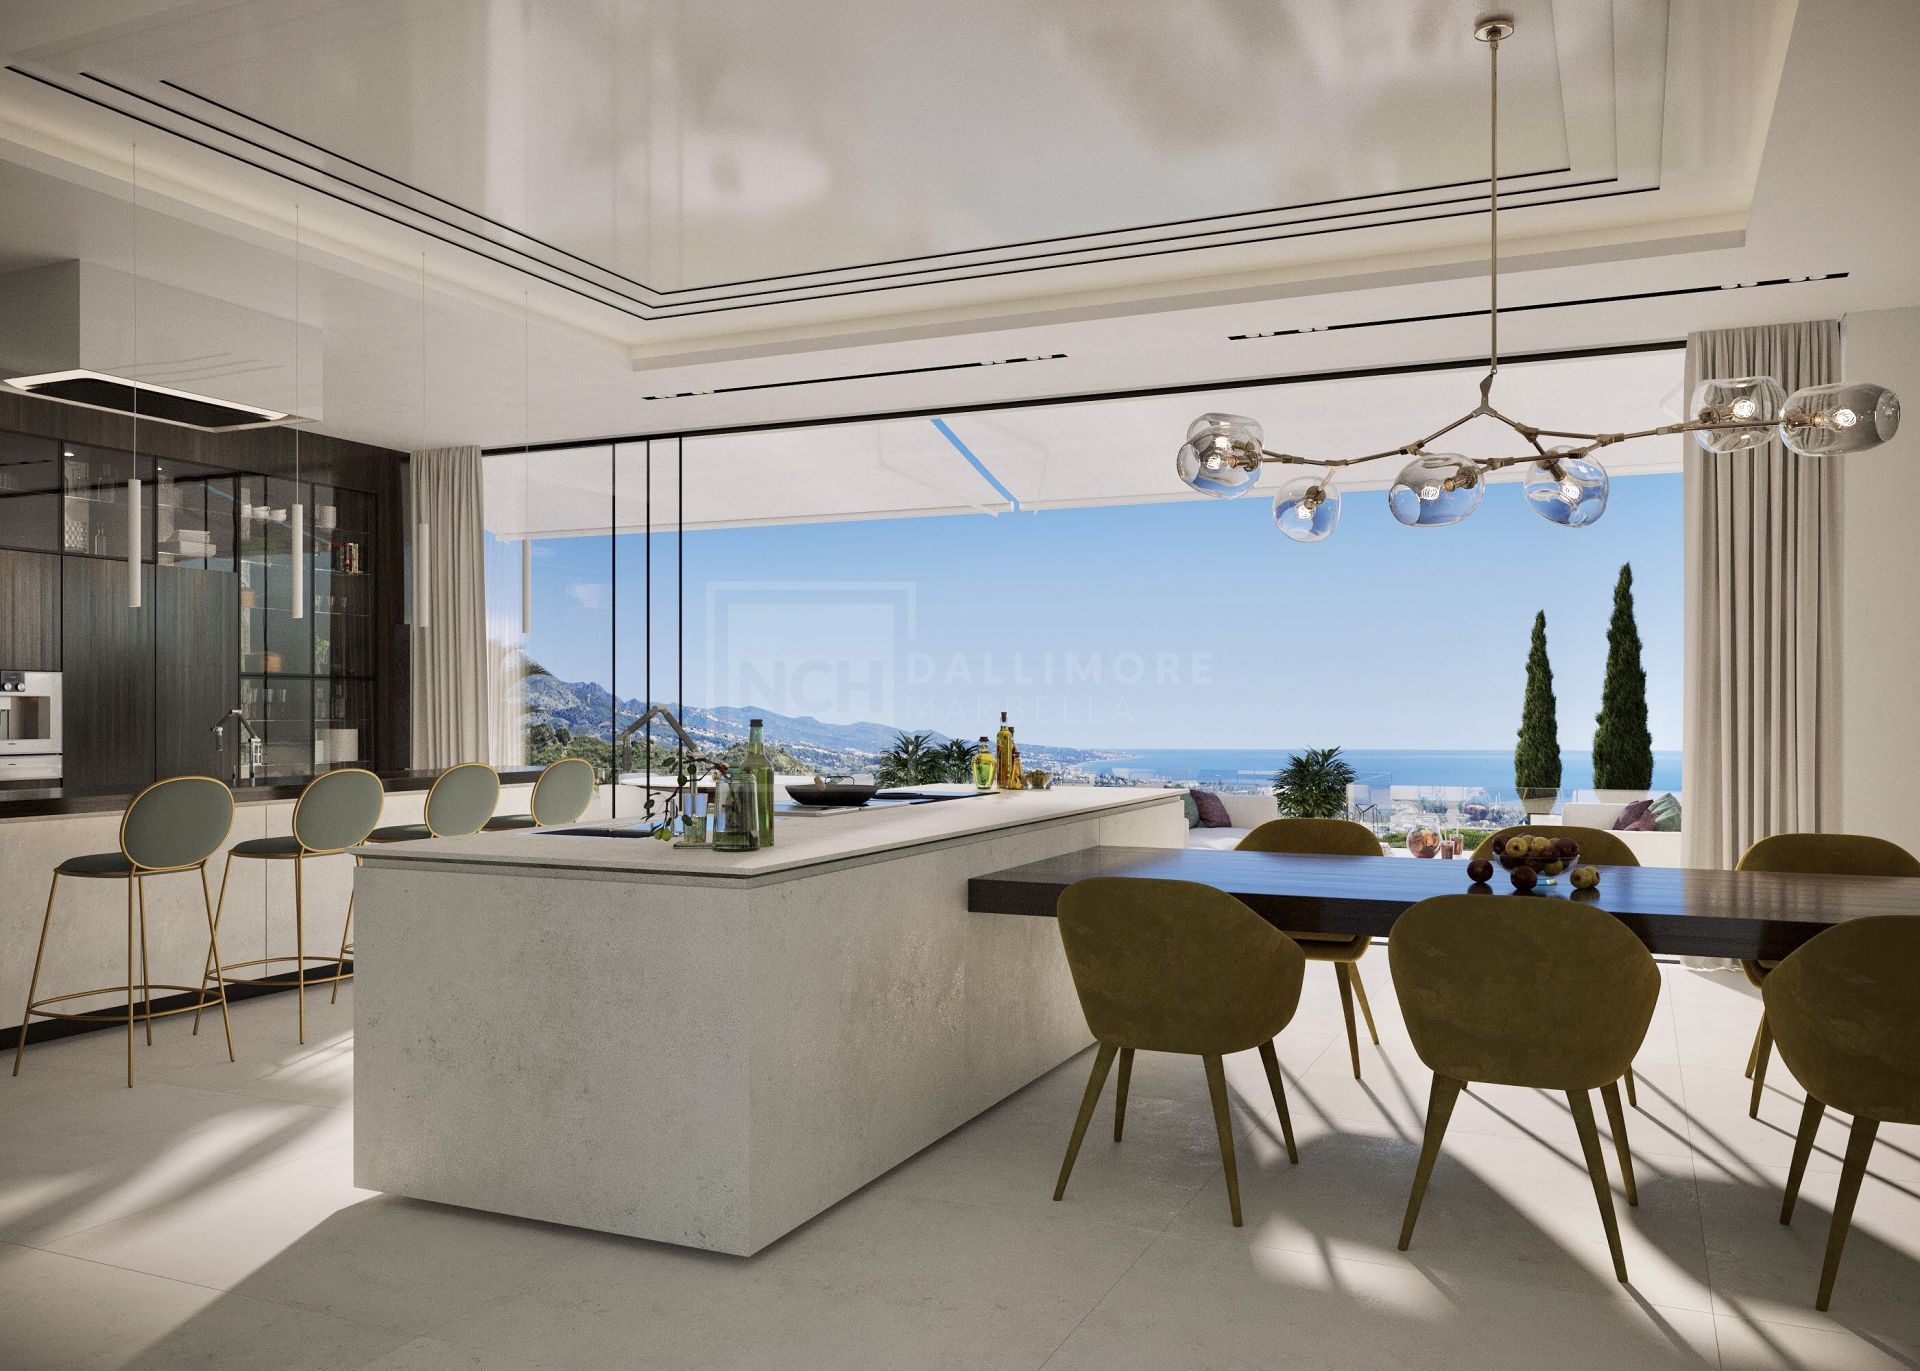 Villa Andaluz, a stunning turnkey project located in the heart of Nueva Andalucia